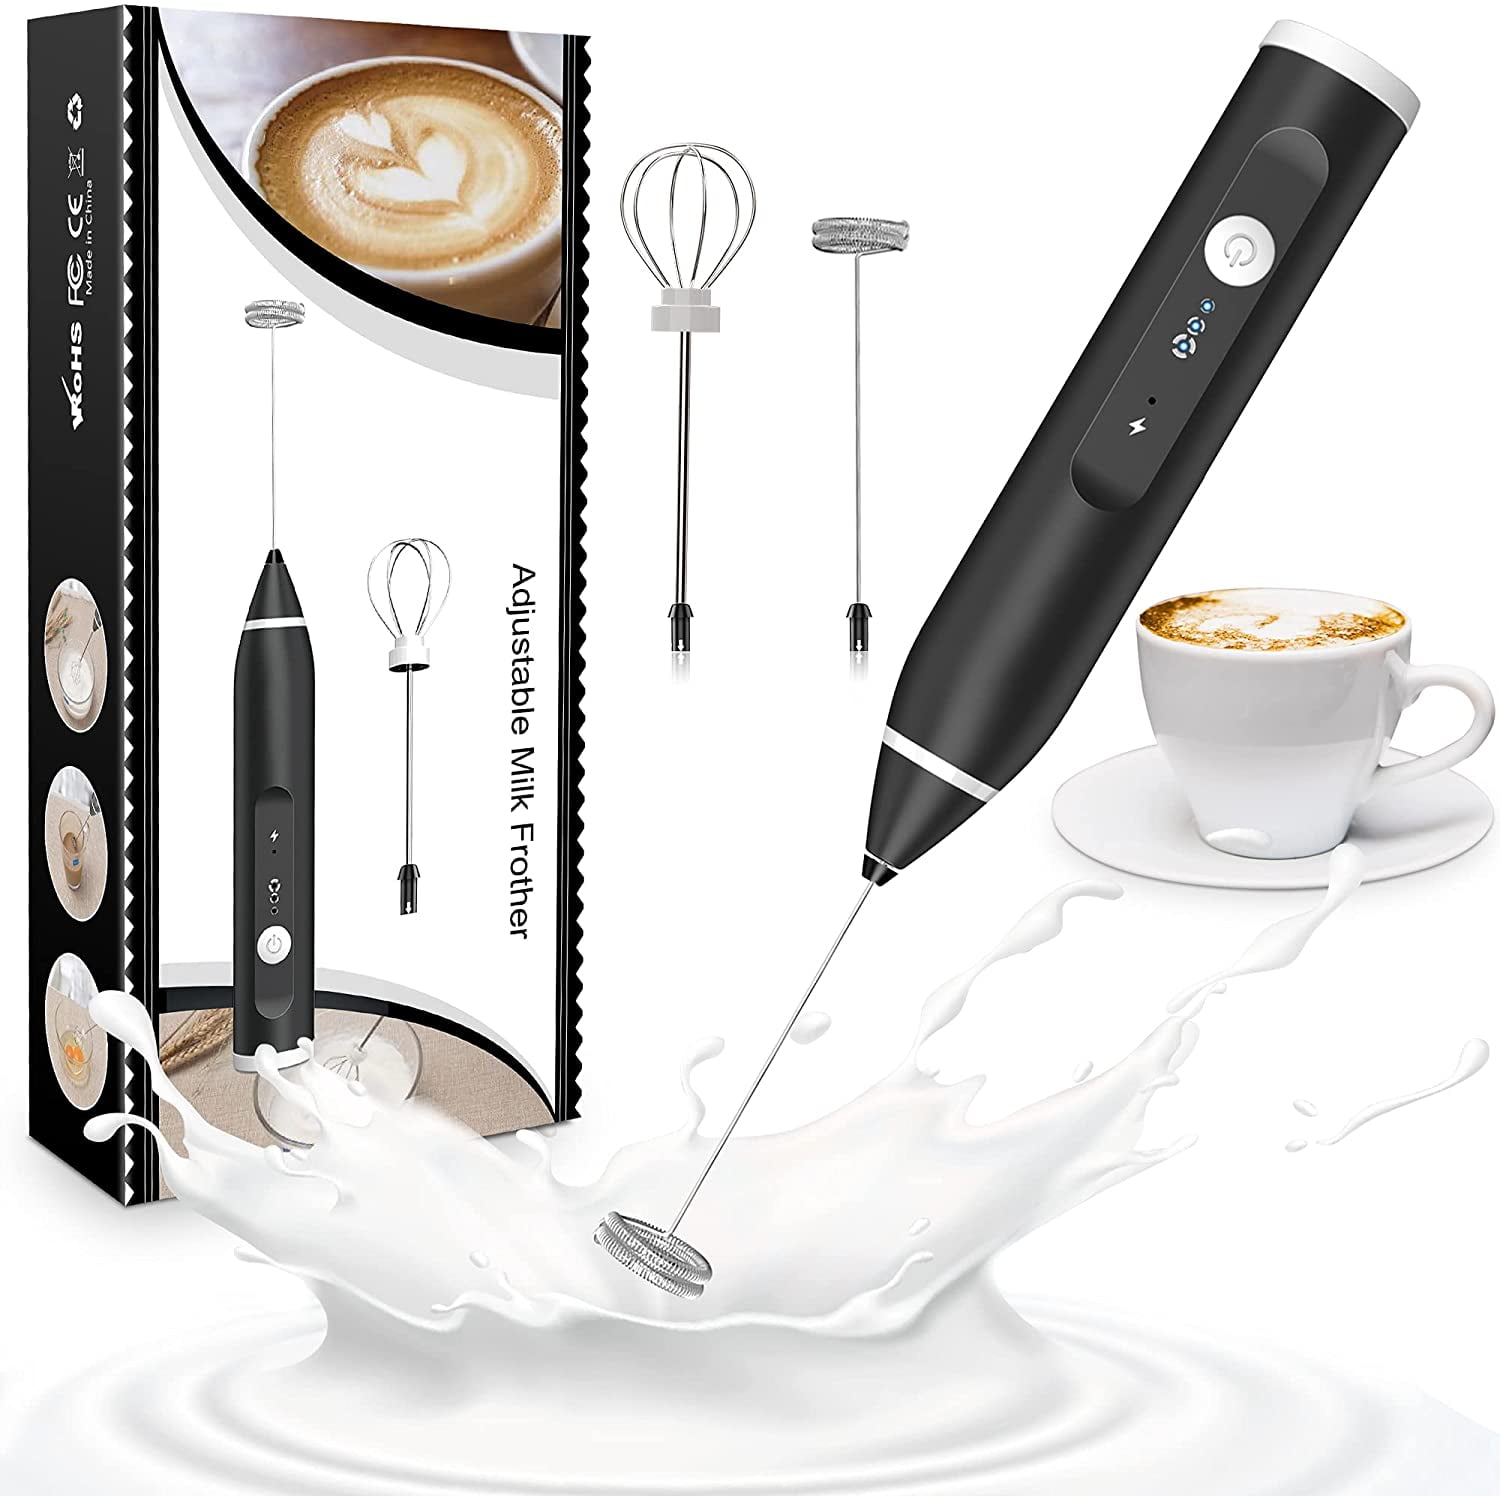 BEAUTLIFE Milk Frother Handheld, USB Rechargeable Milk Foam Maker with 3 Stainless Whisks, Mini Blender Mixer 3 Speeds Adjustable for Coffee, Latte